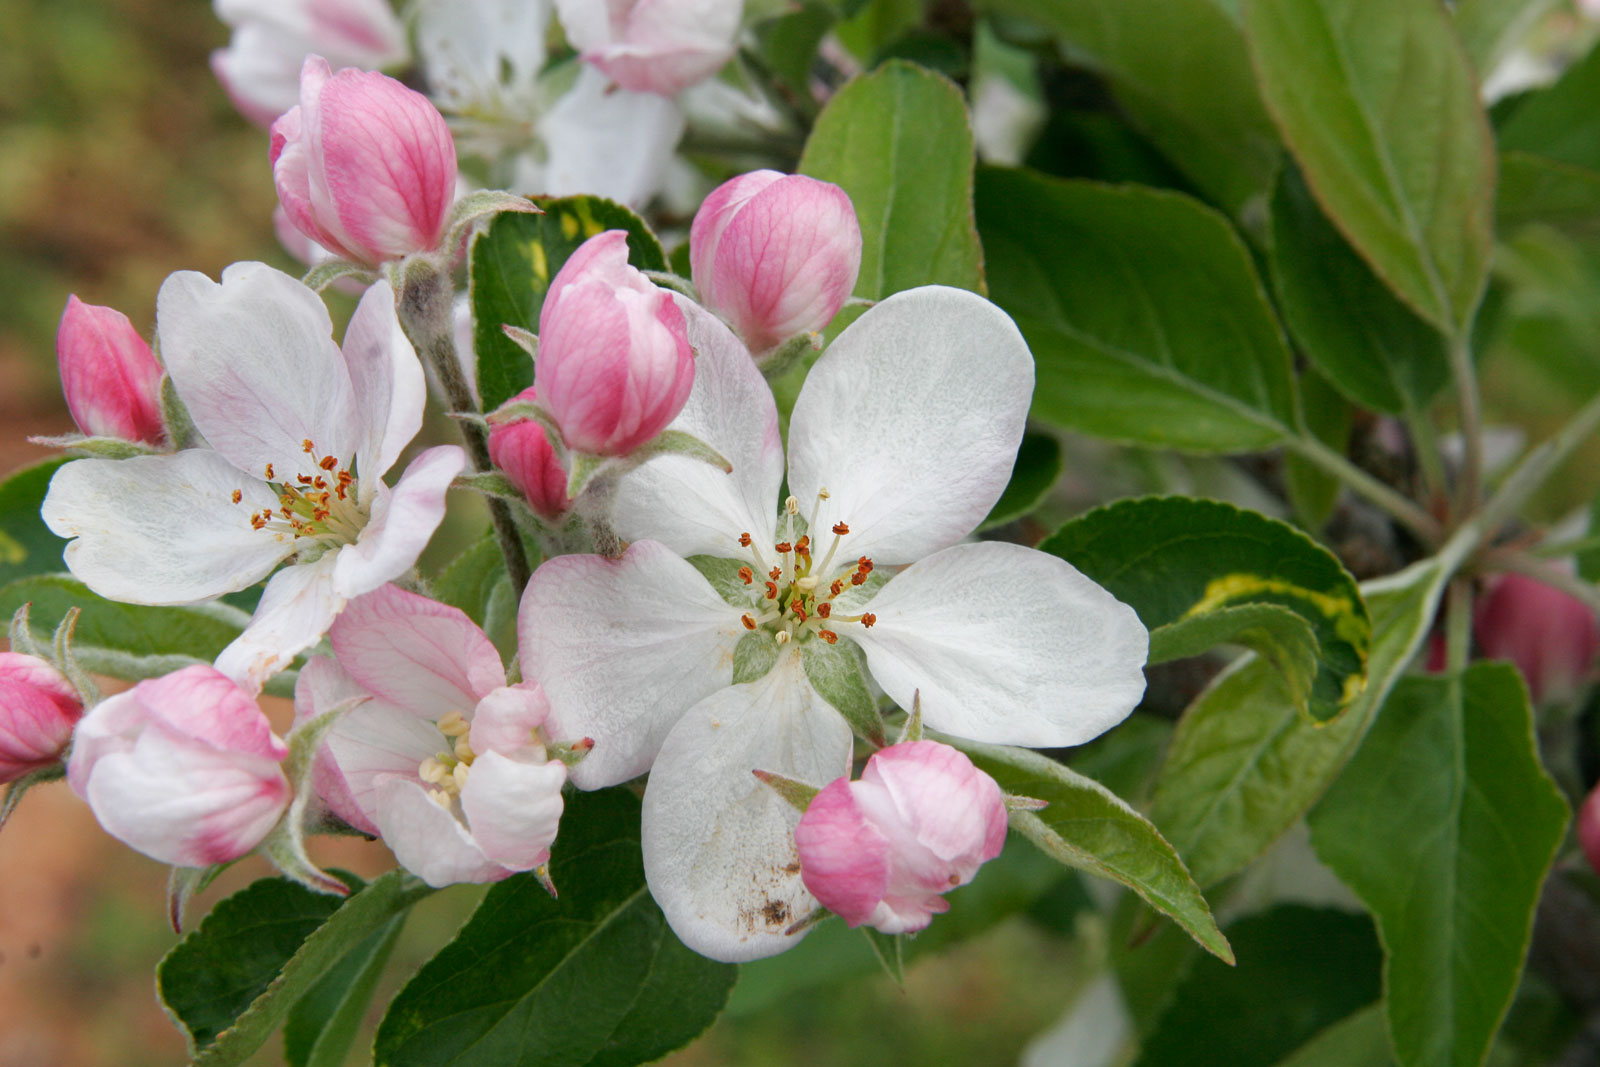 Apple blossom and bud wallpaper - Flower wallpapers - #3445